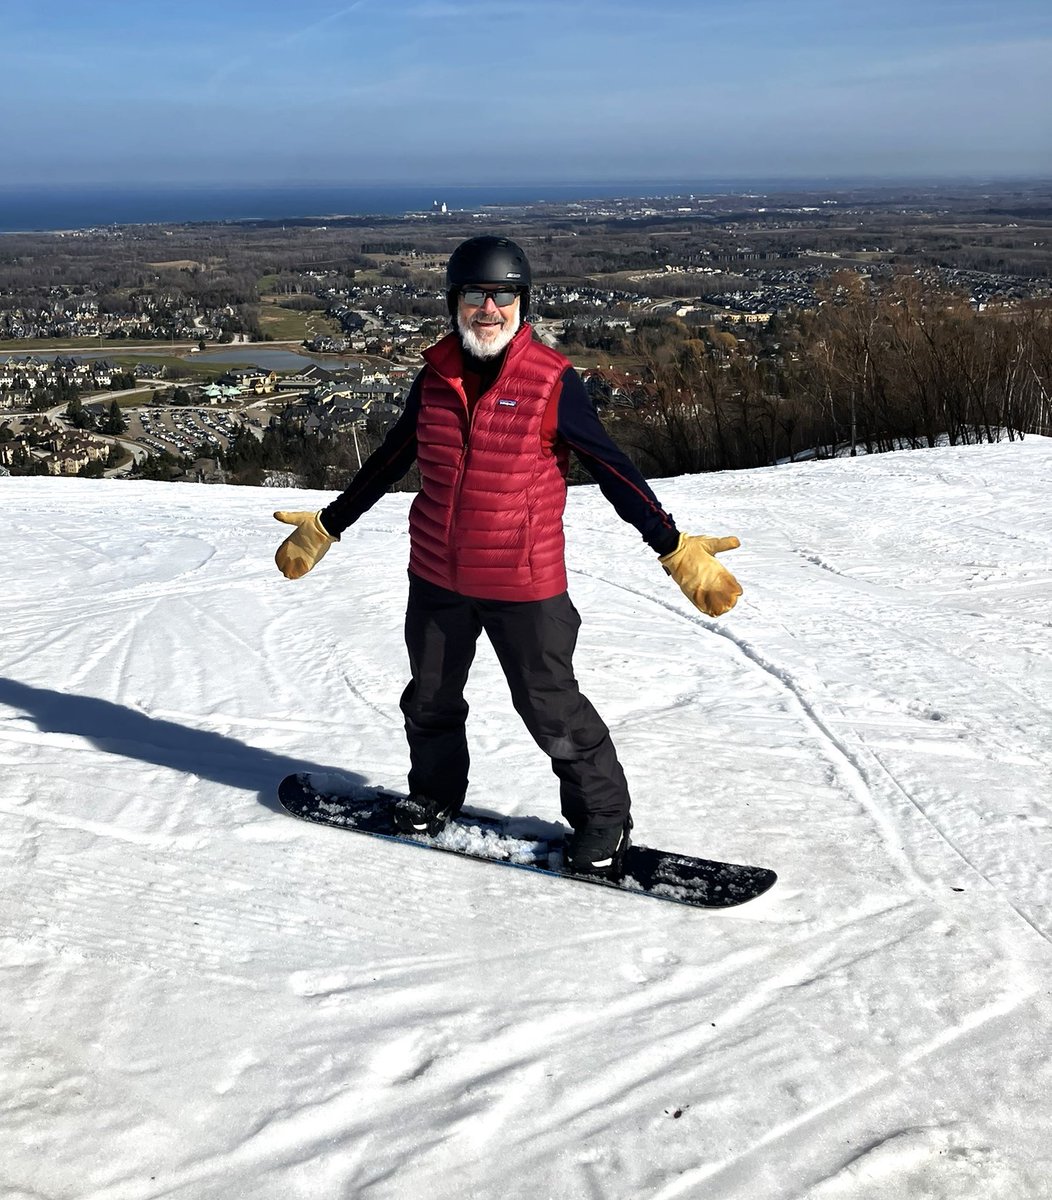 What an exhilarating few days at @BlueMtnResort in Ontario! This month, our #SoldierOn members soaked up the snowy thrills with 4 days of alpine skiing and snowboarding. Members received excellent guidance and coaching from ski instructors and then had the chance to practice